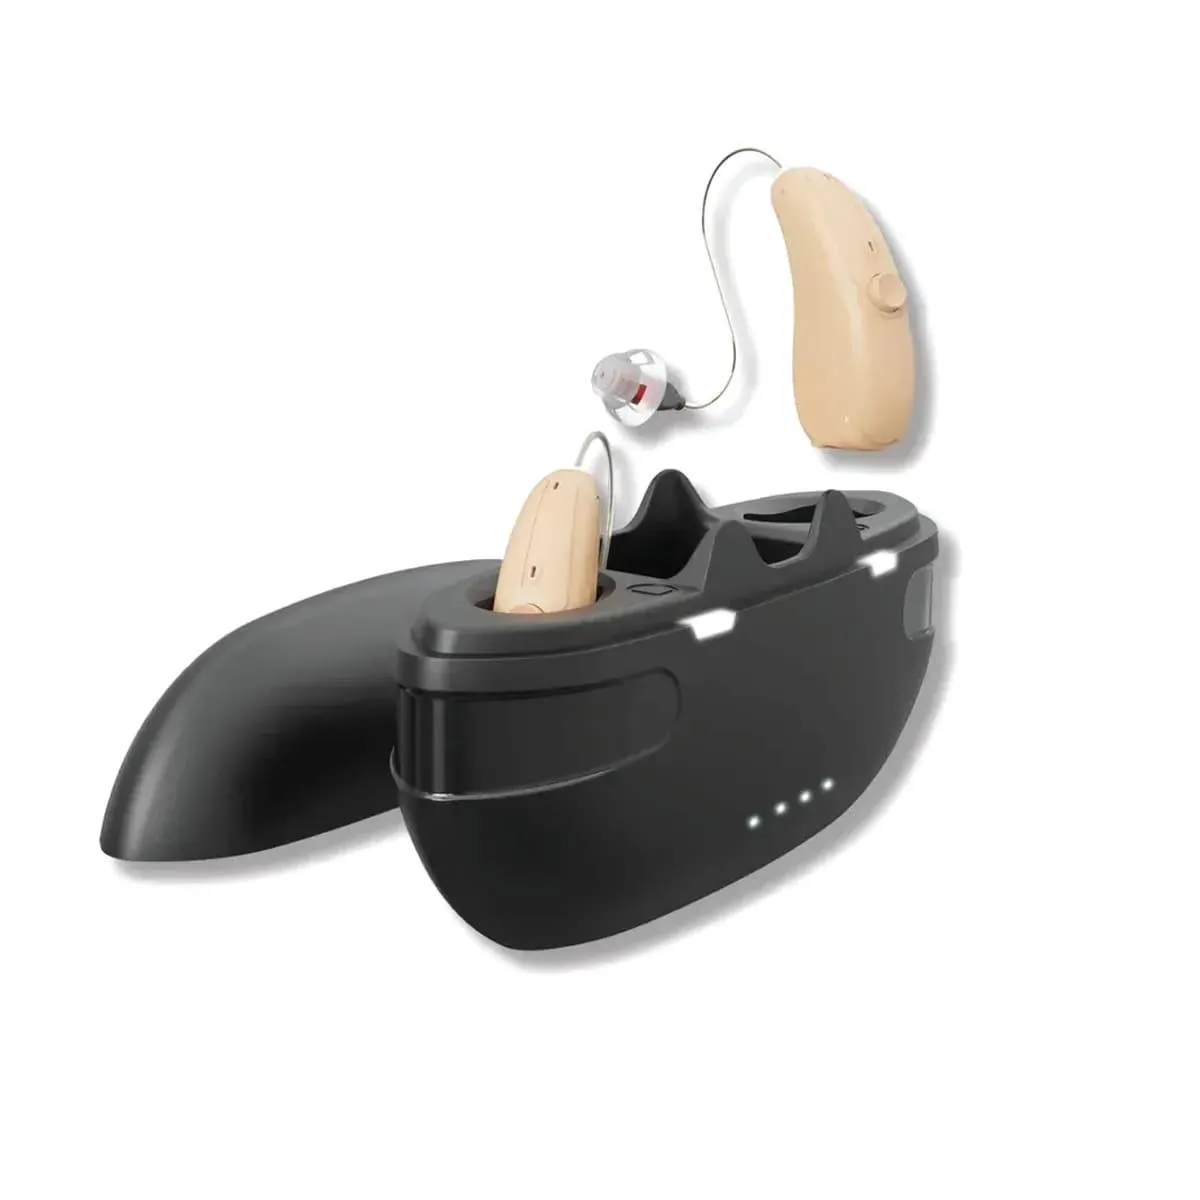 Otofonix Hearing Aids Sold Direct To The Consumer Mobile Website Image_encore